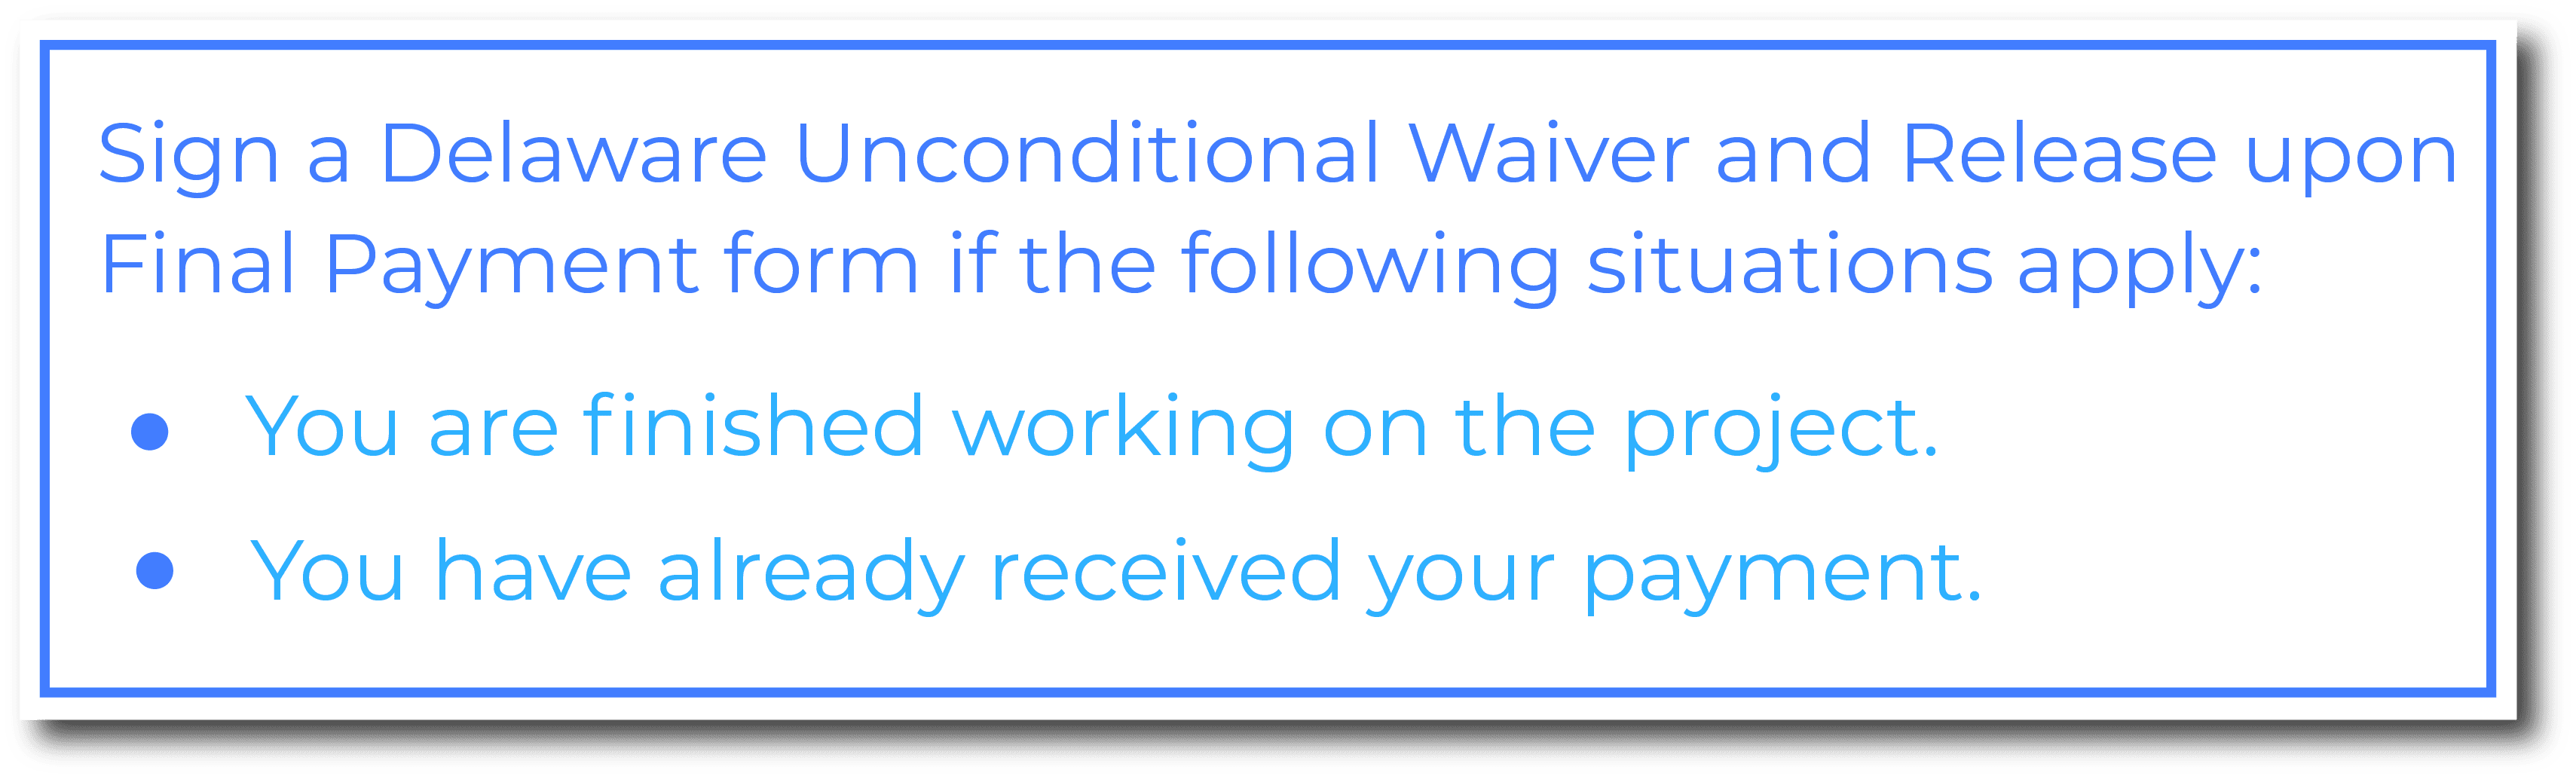 Delaware Unconditional Waiver and Release upon Final Payment